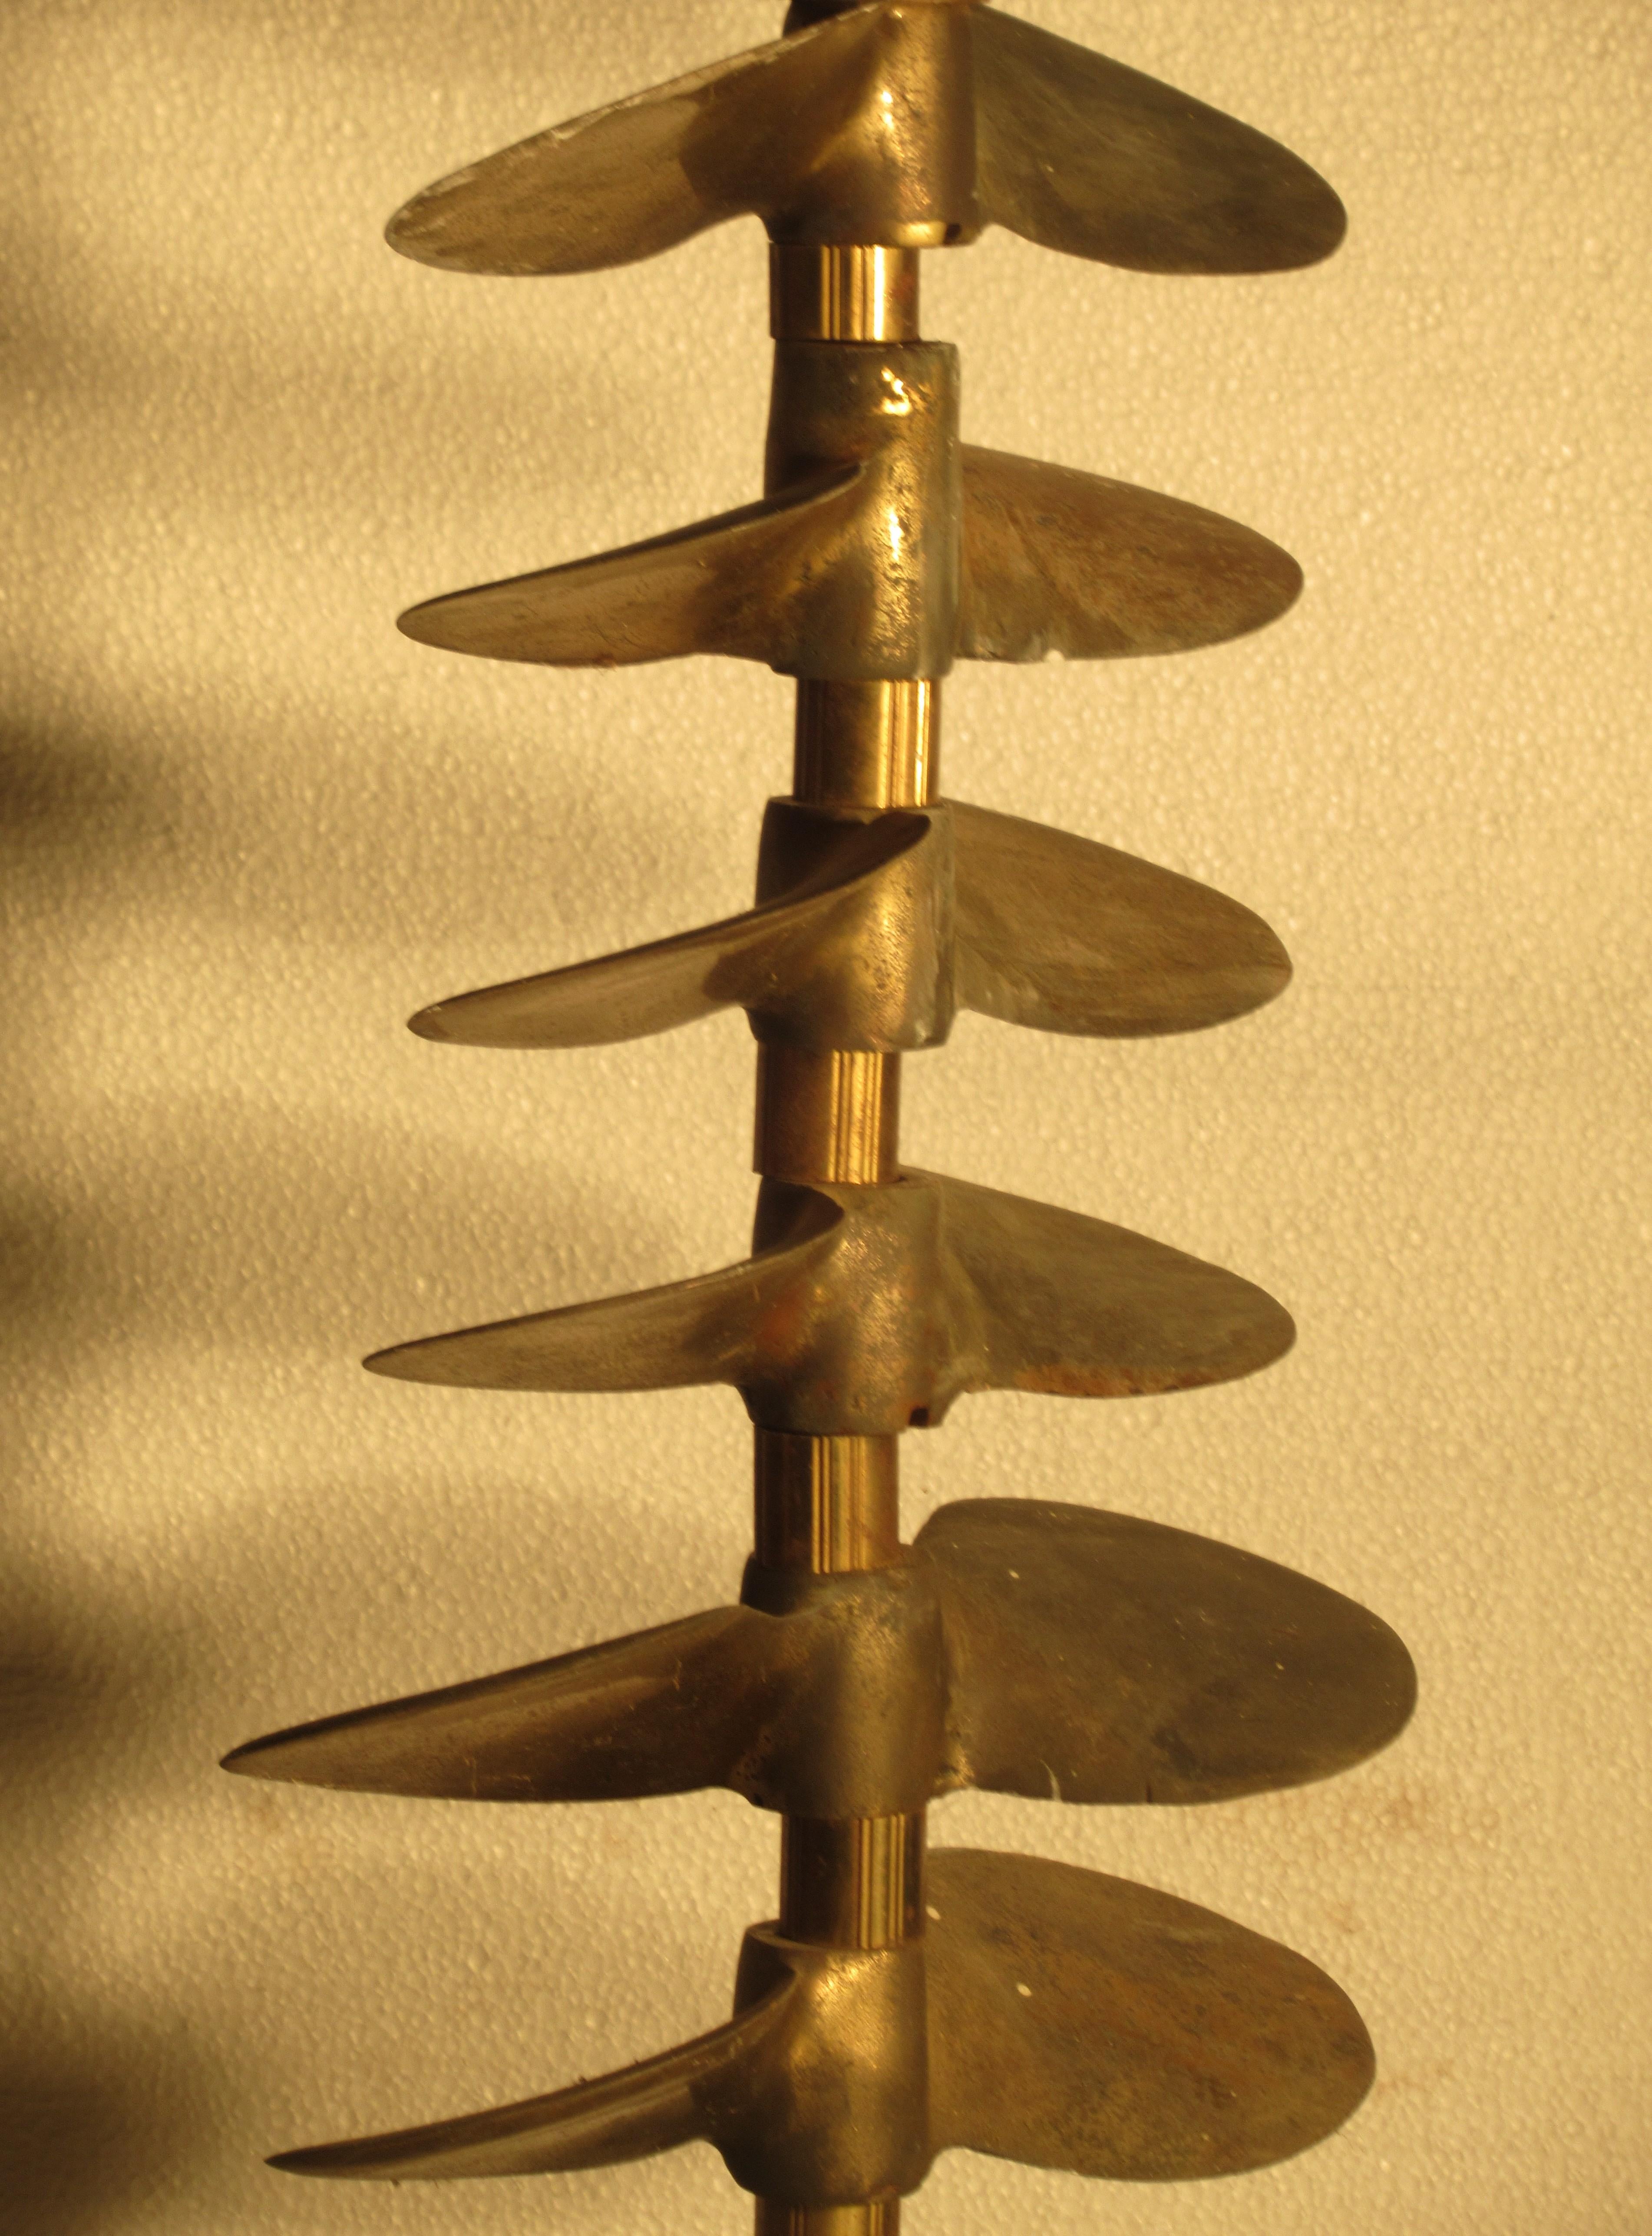  Antique custom made nautical theme lamp constructed of seven tiered bronze propellers mounted on a shaft with a bronze, wood and glass porthole base. This is not a newly repurposed item, it is an old lamp and dates anywhere from 1920 - 1940. Height